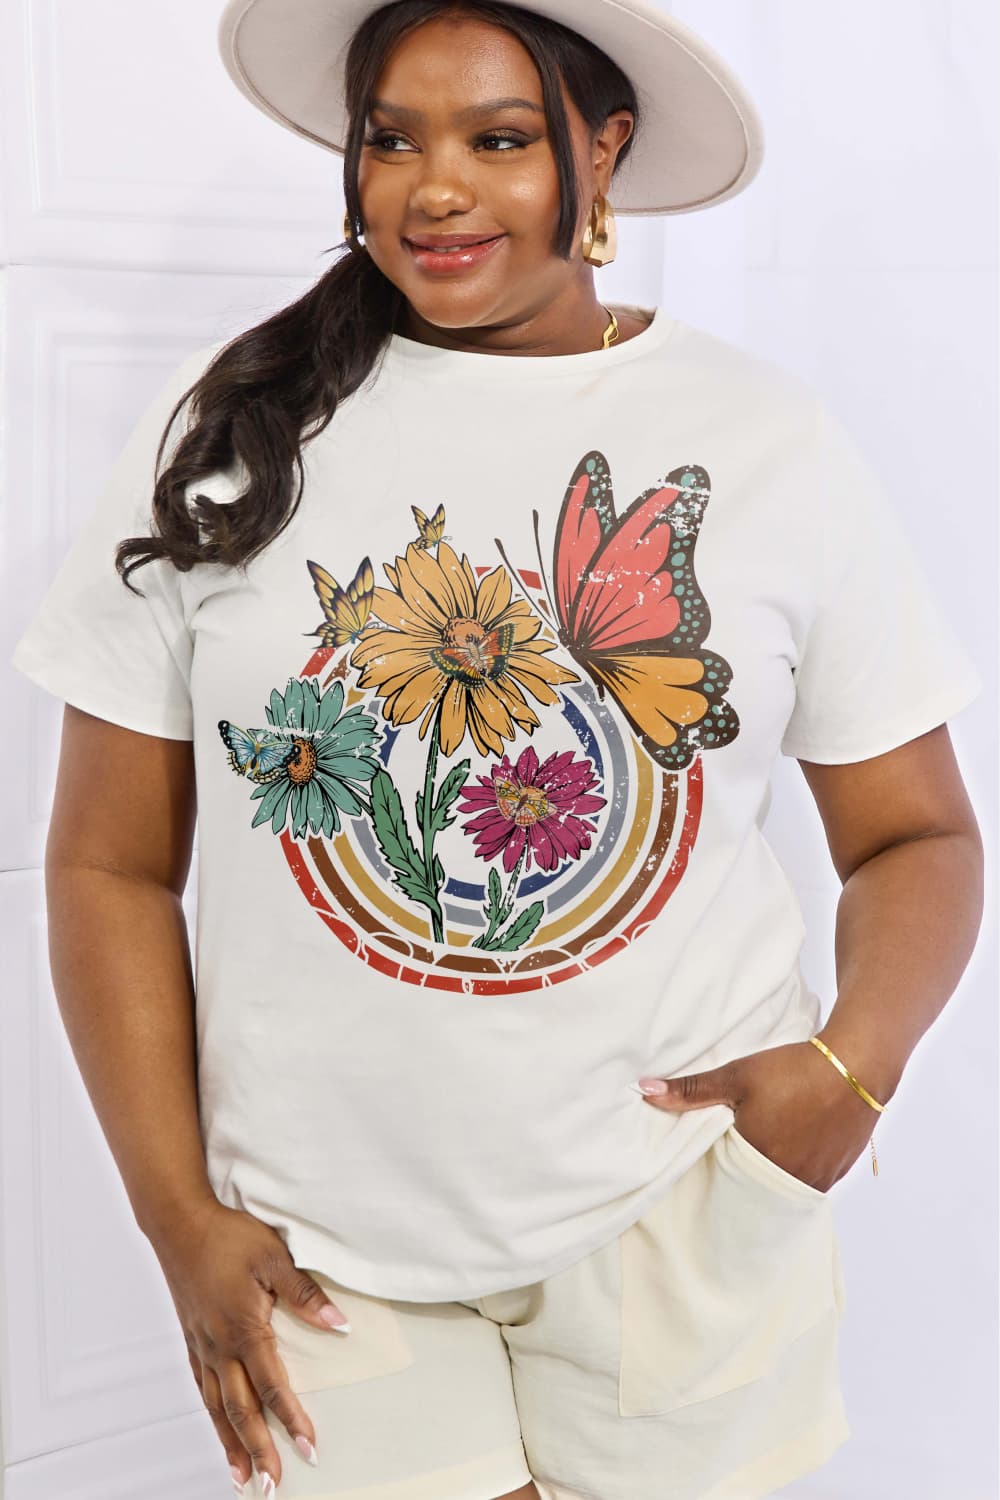 Simply Love Flower & Butterfly Graphic Cotton Tee